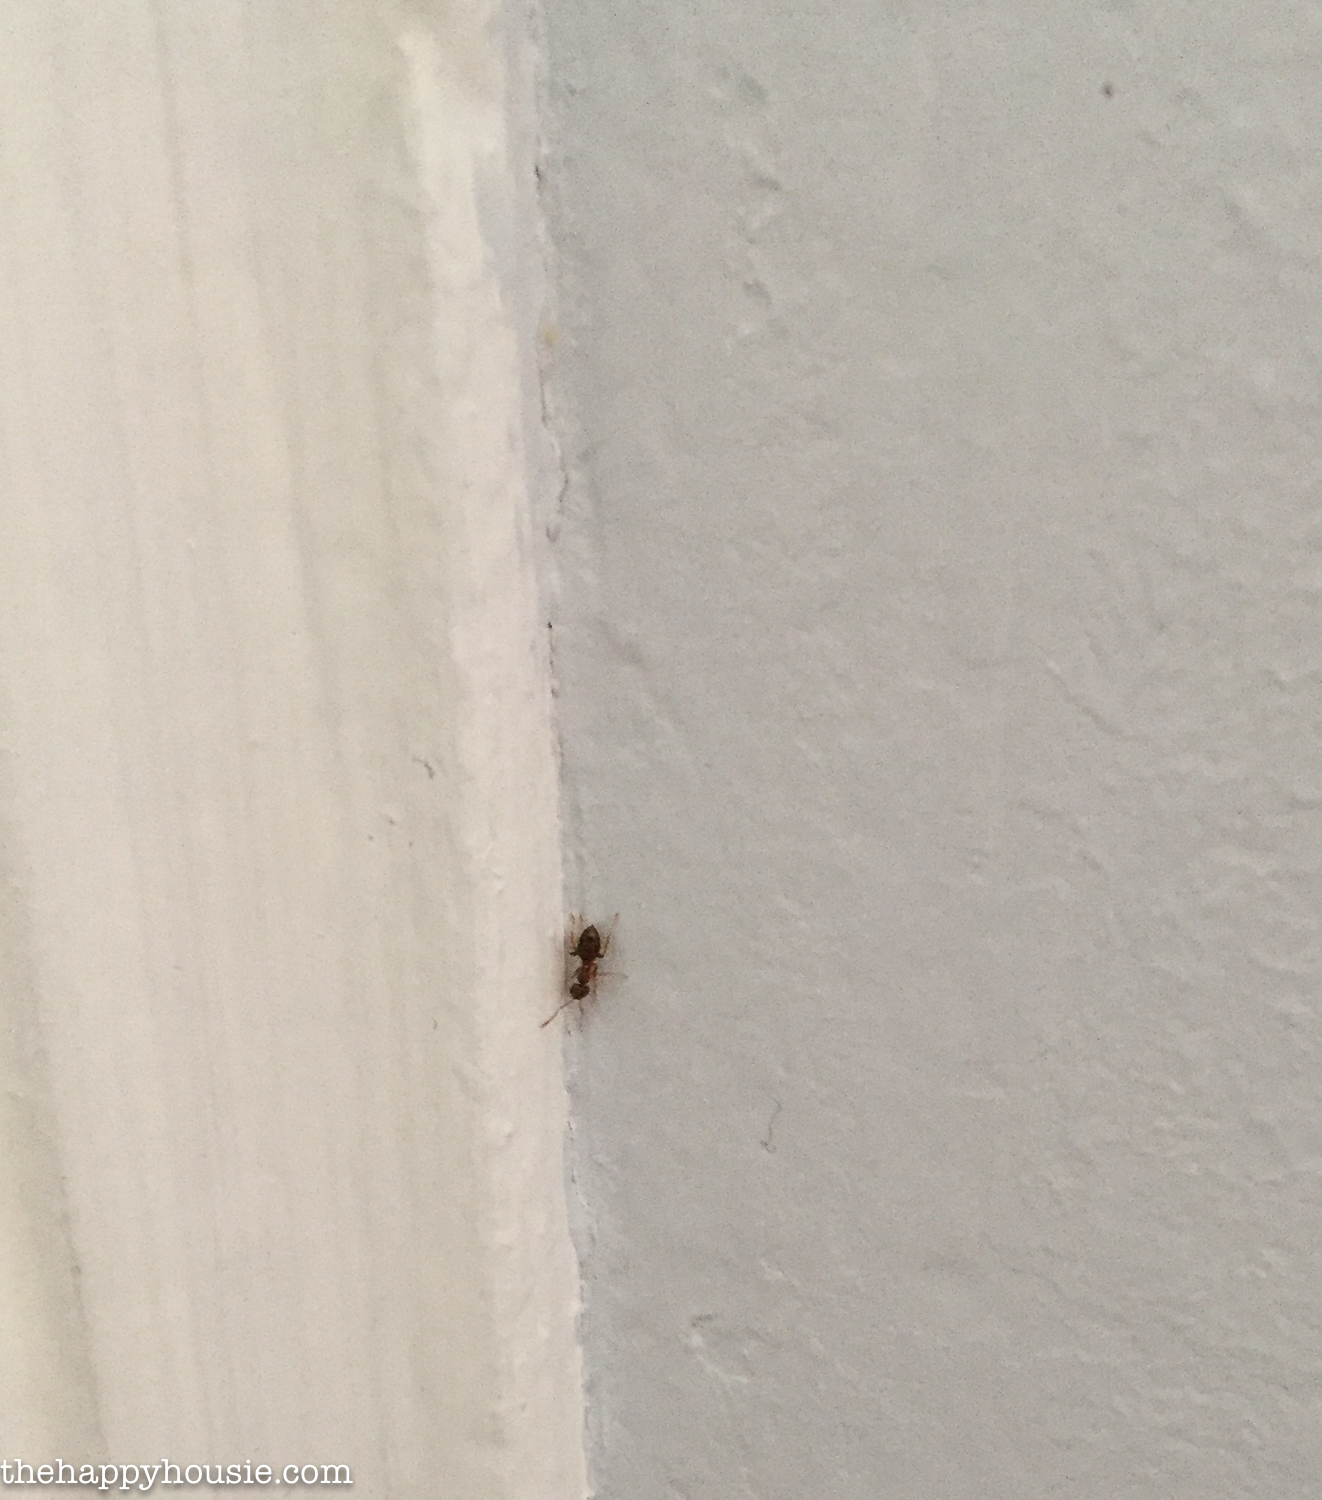 An ant by a crack in the wall.